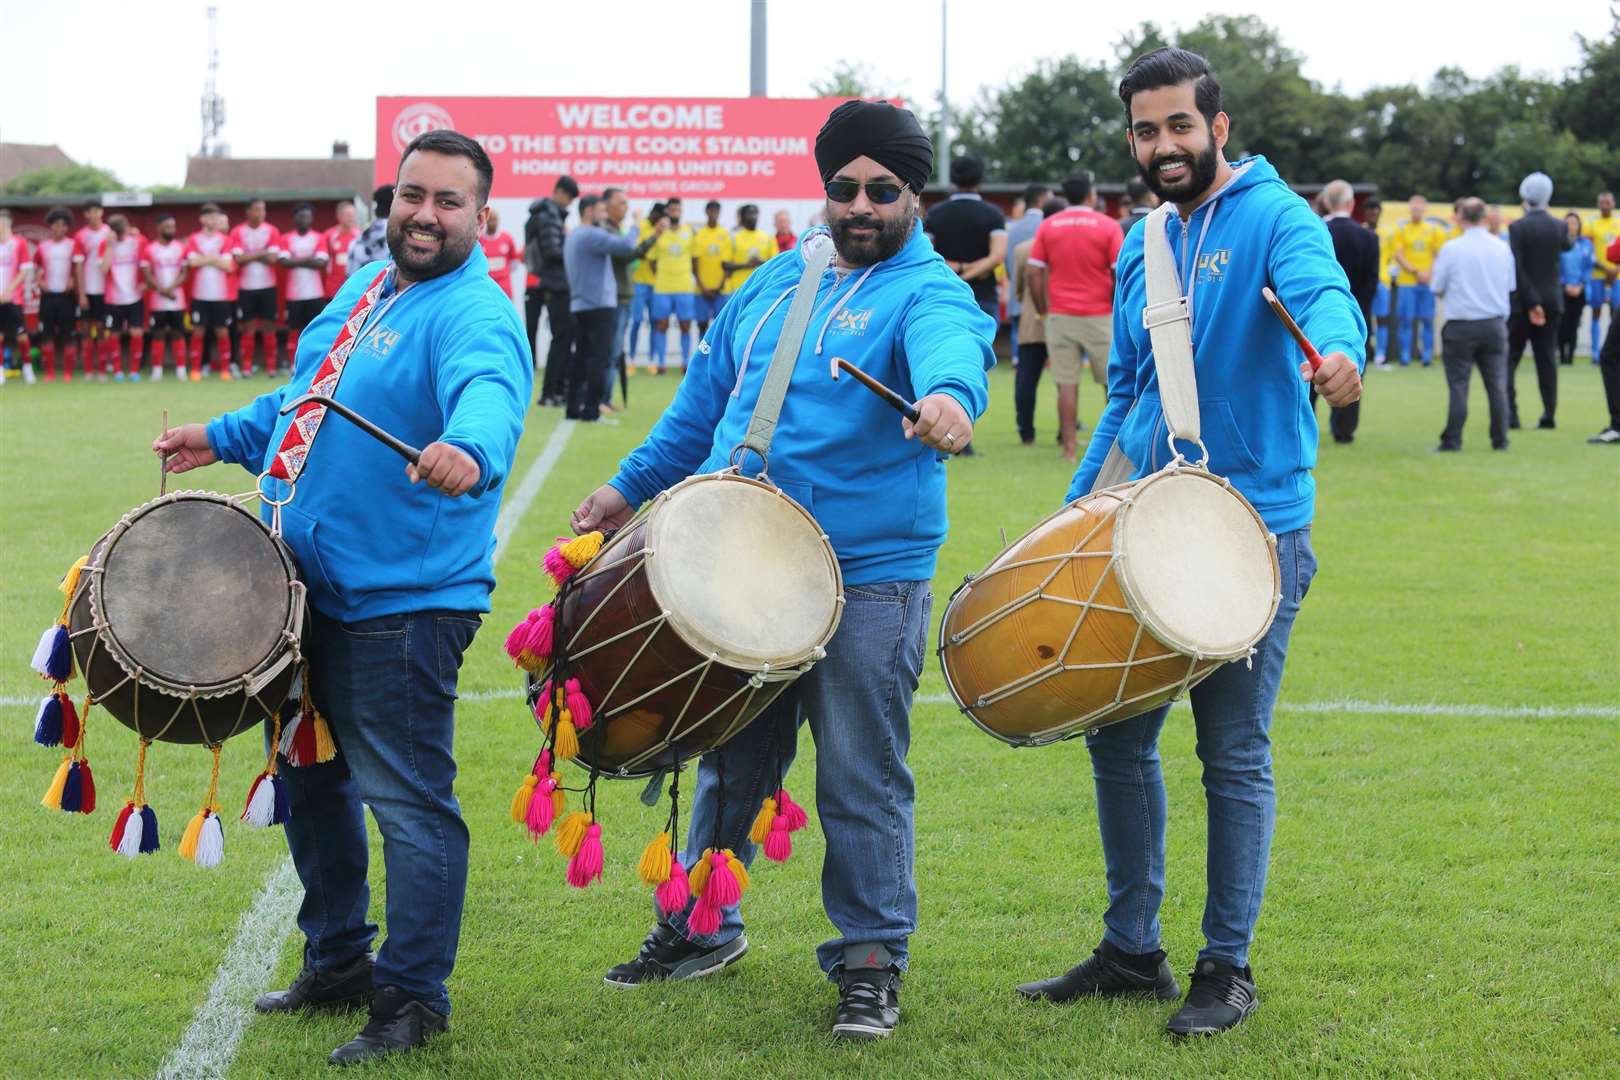 The 4x4 Kings of Dhol drummers. Pictures: Sarah Knight Cohesion Plus